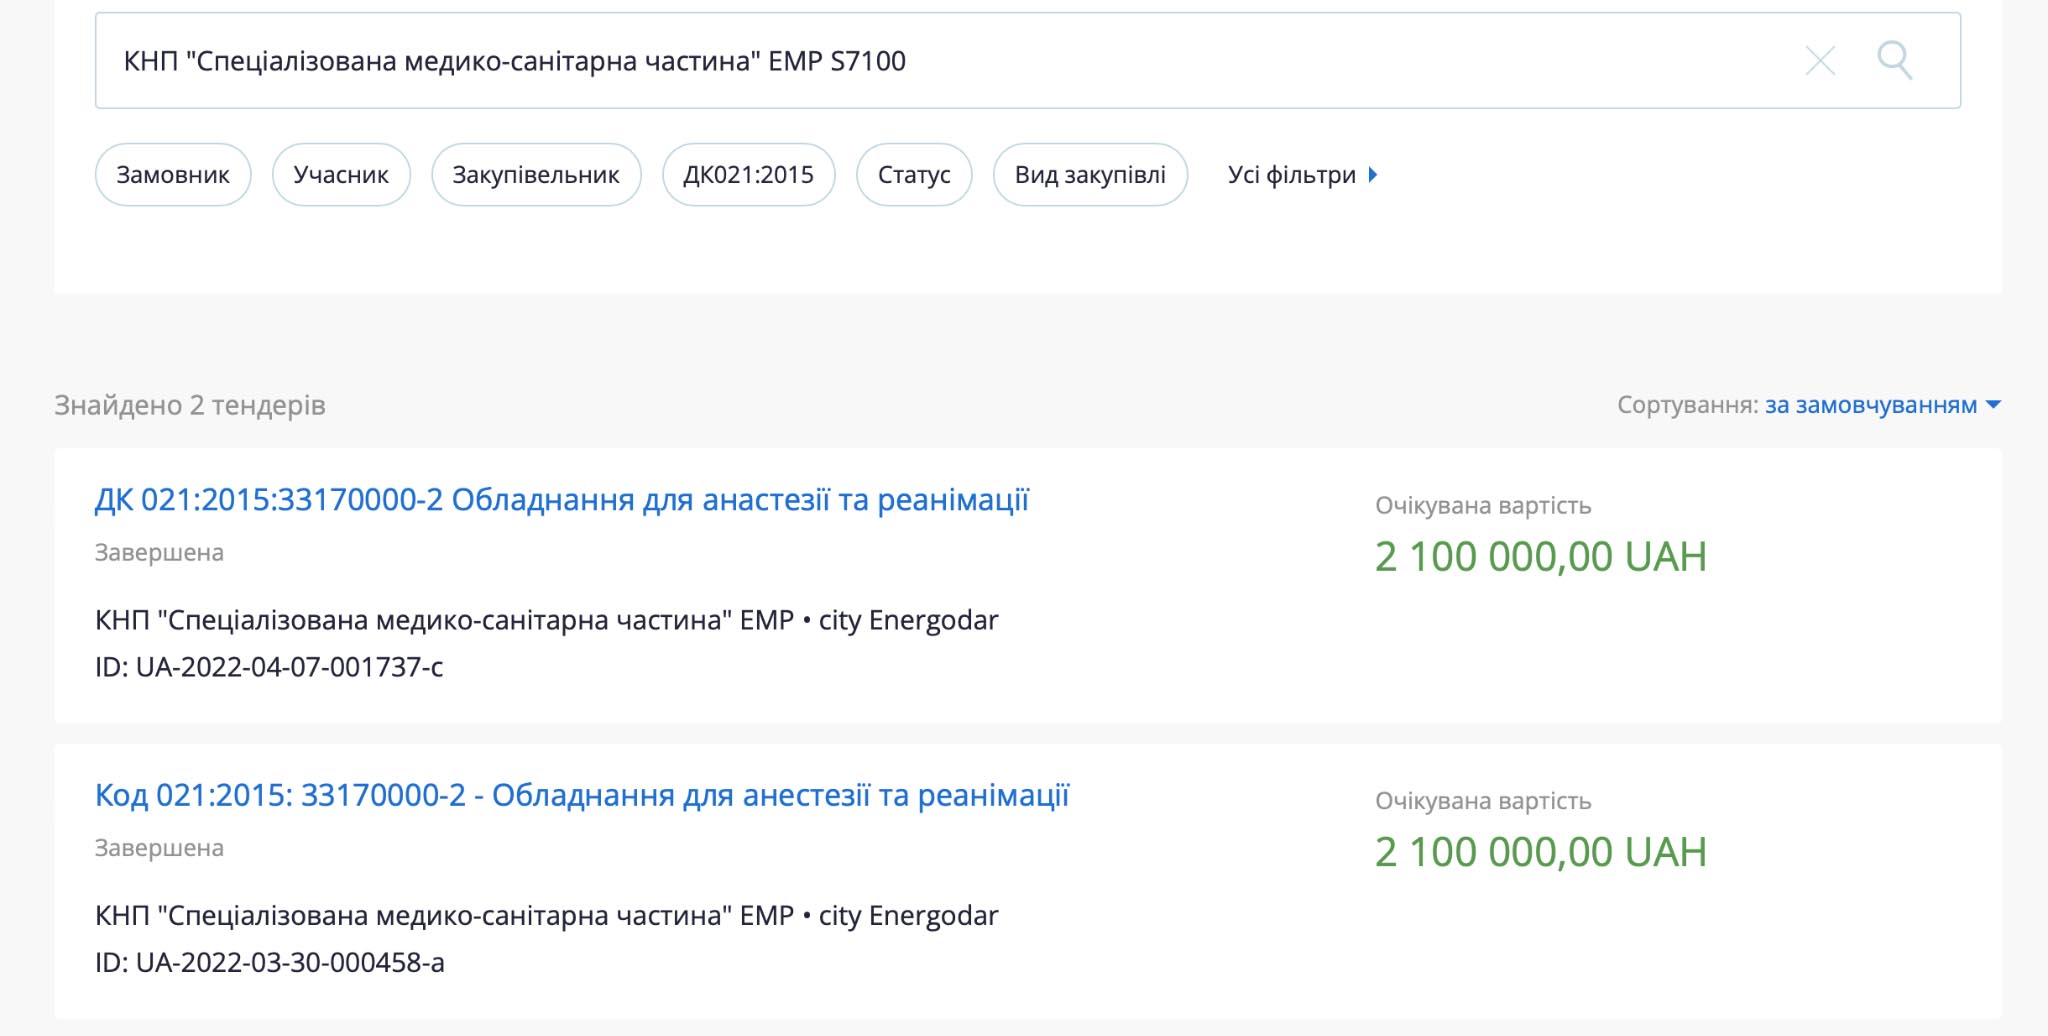 Screenshot from the Prozorro system regarding the purchase of medical equipment for the occupied Energodar